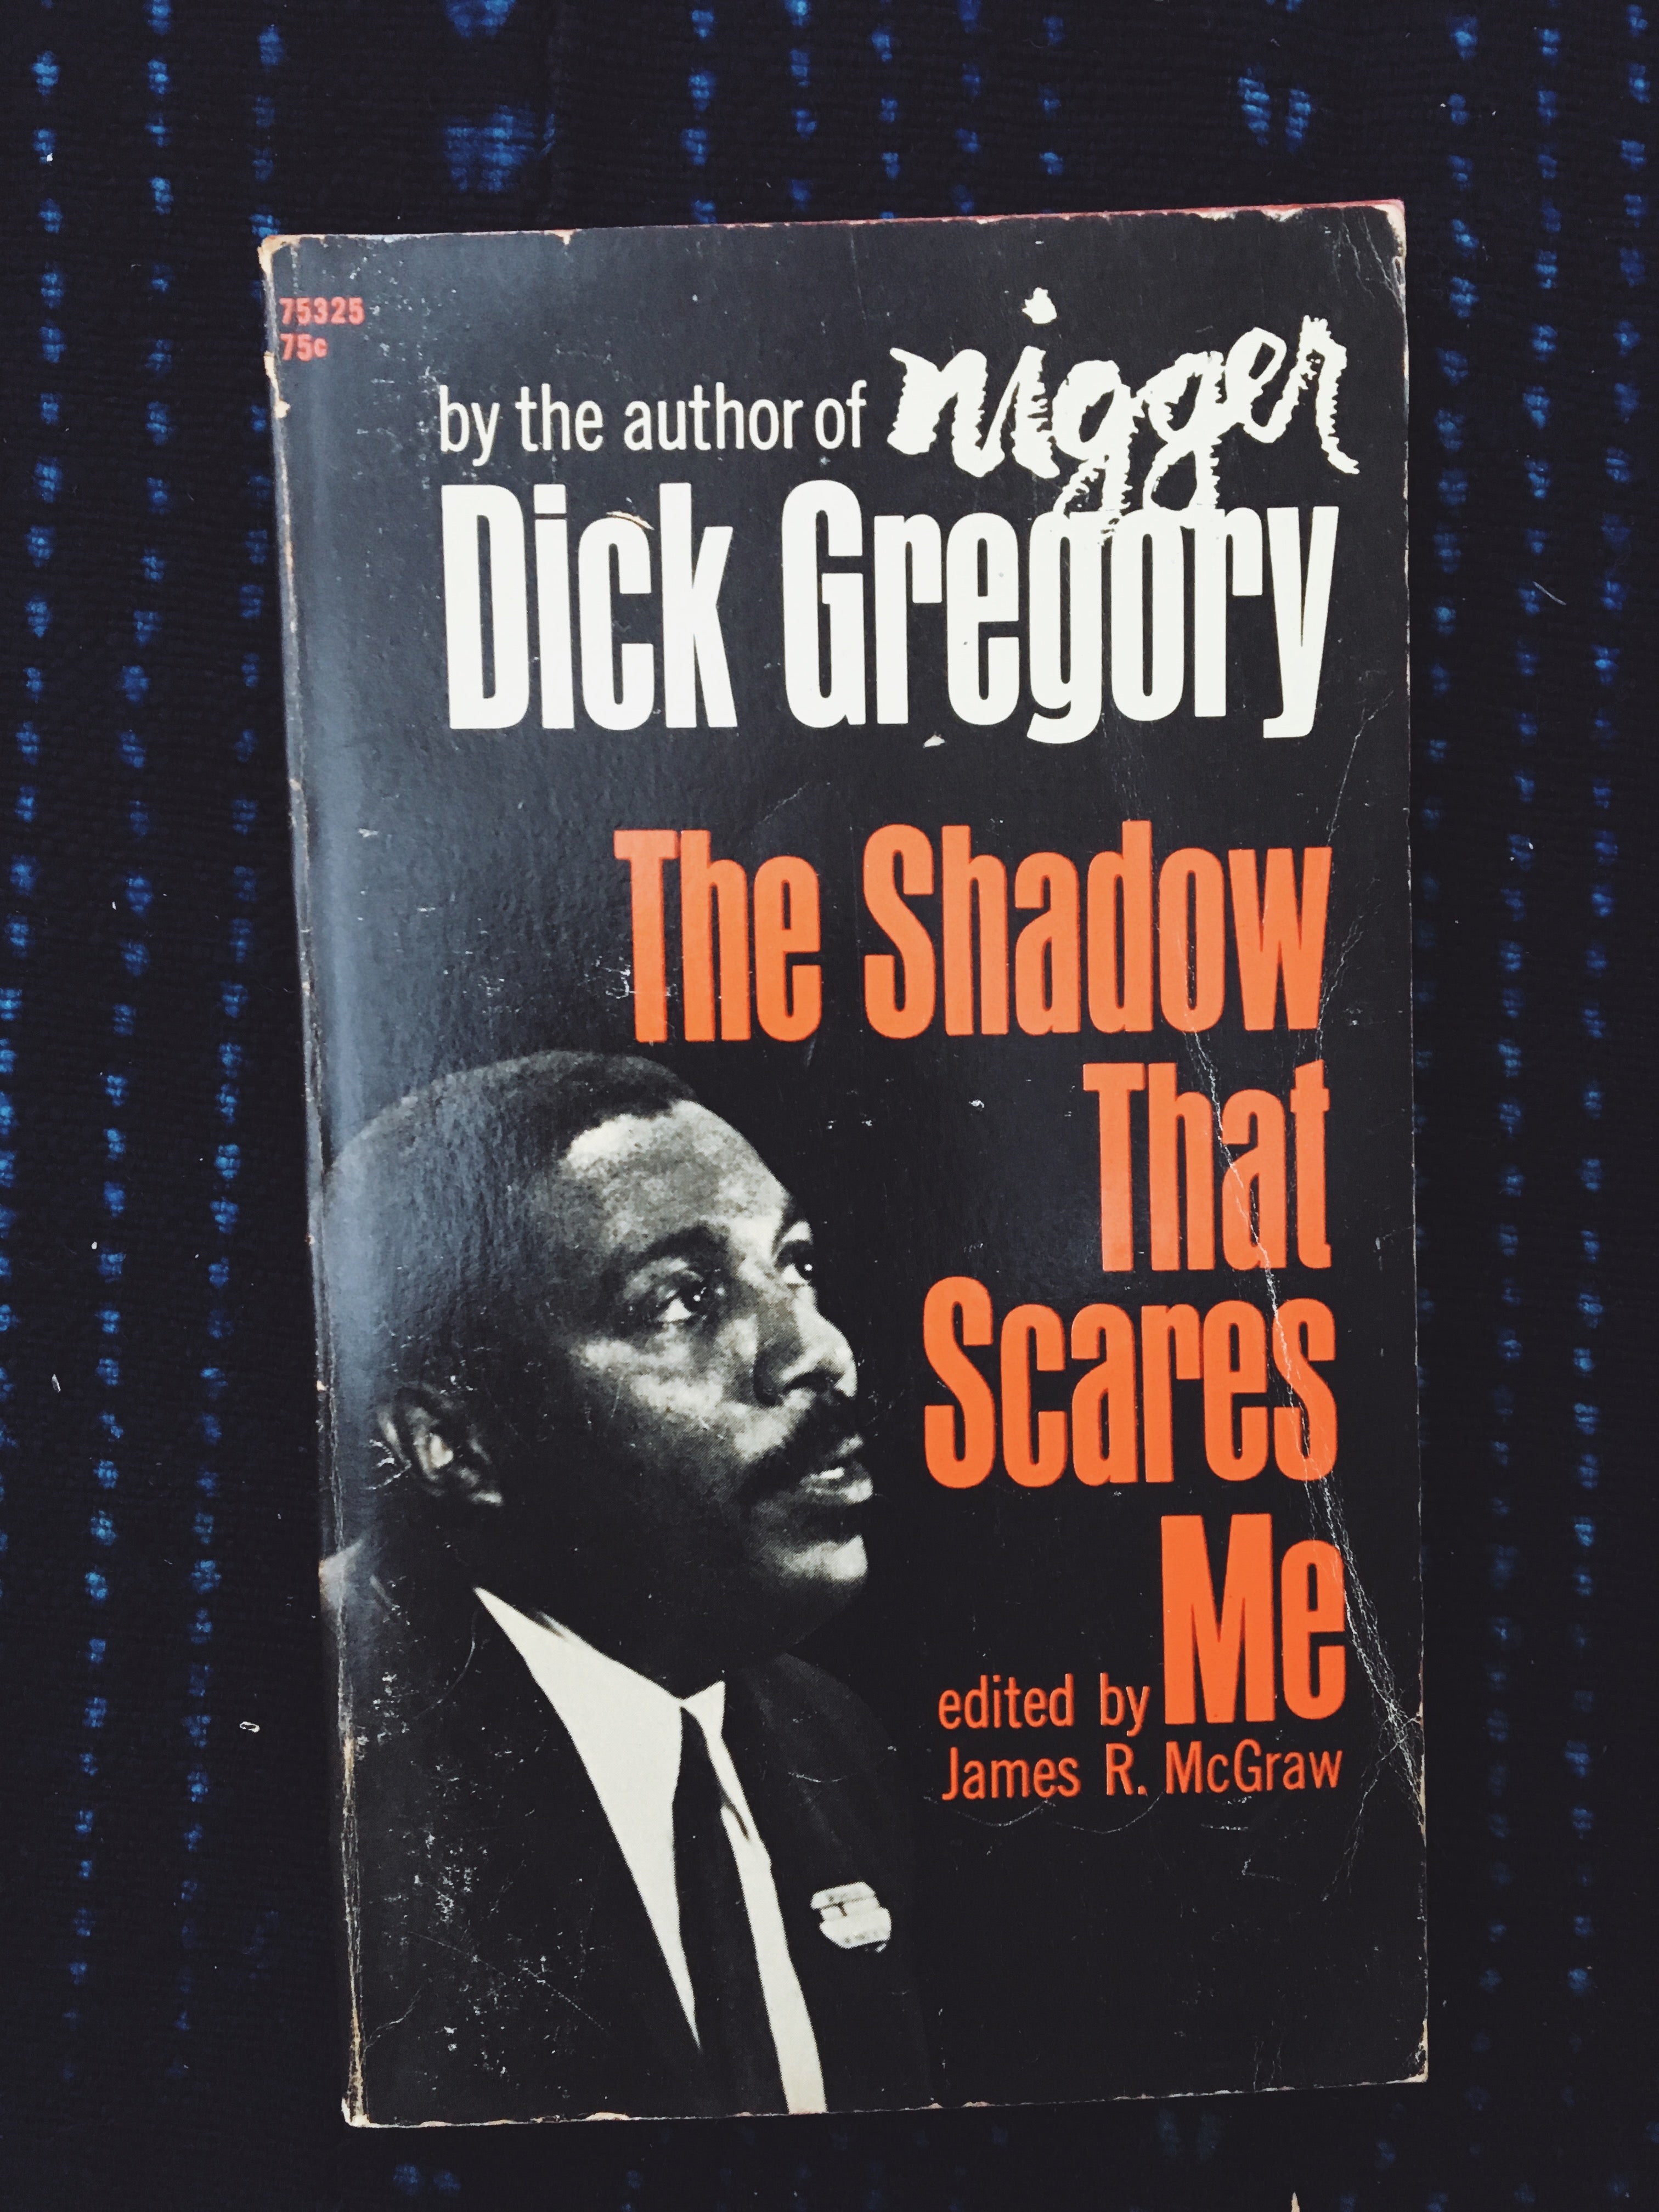 Vintage paperback copy of &quot;The Shadow That Scares Me&quot; by Dick Gregory (1968)